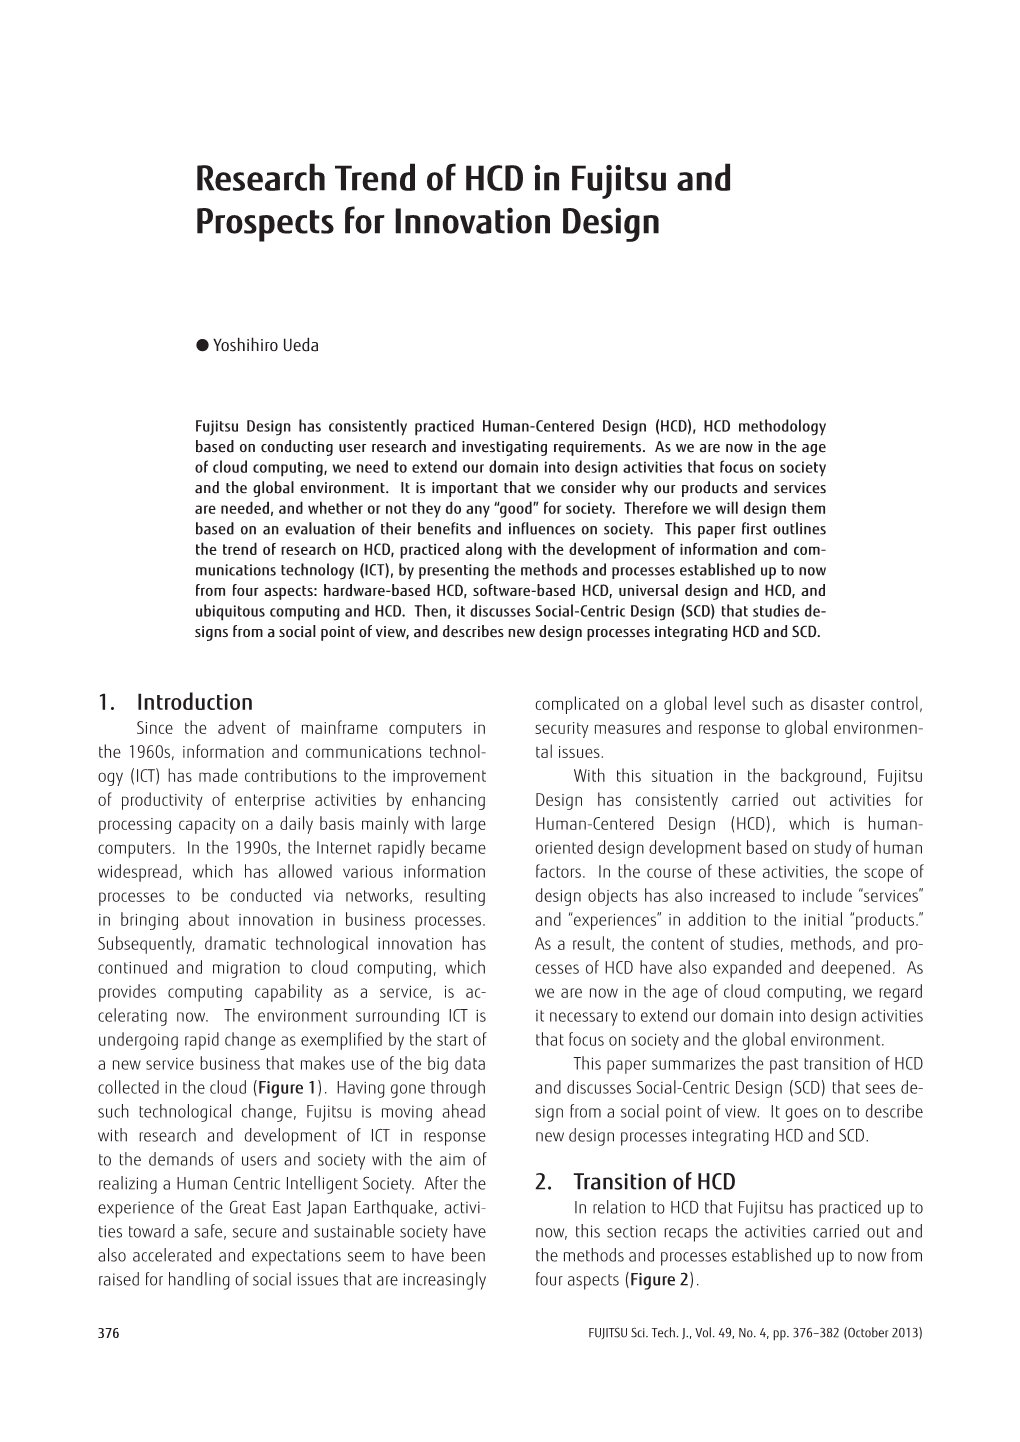 Research Trend of HCD in Fujitsu and Prospects for Innovation Design